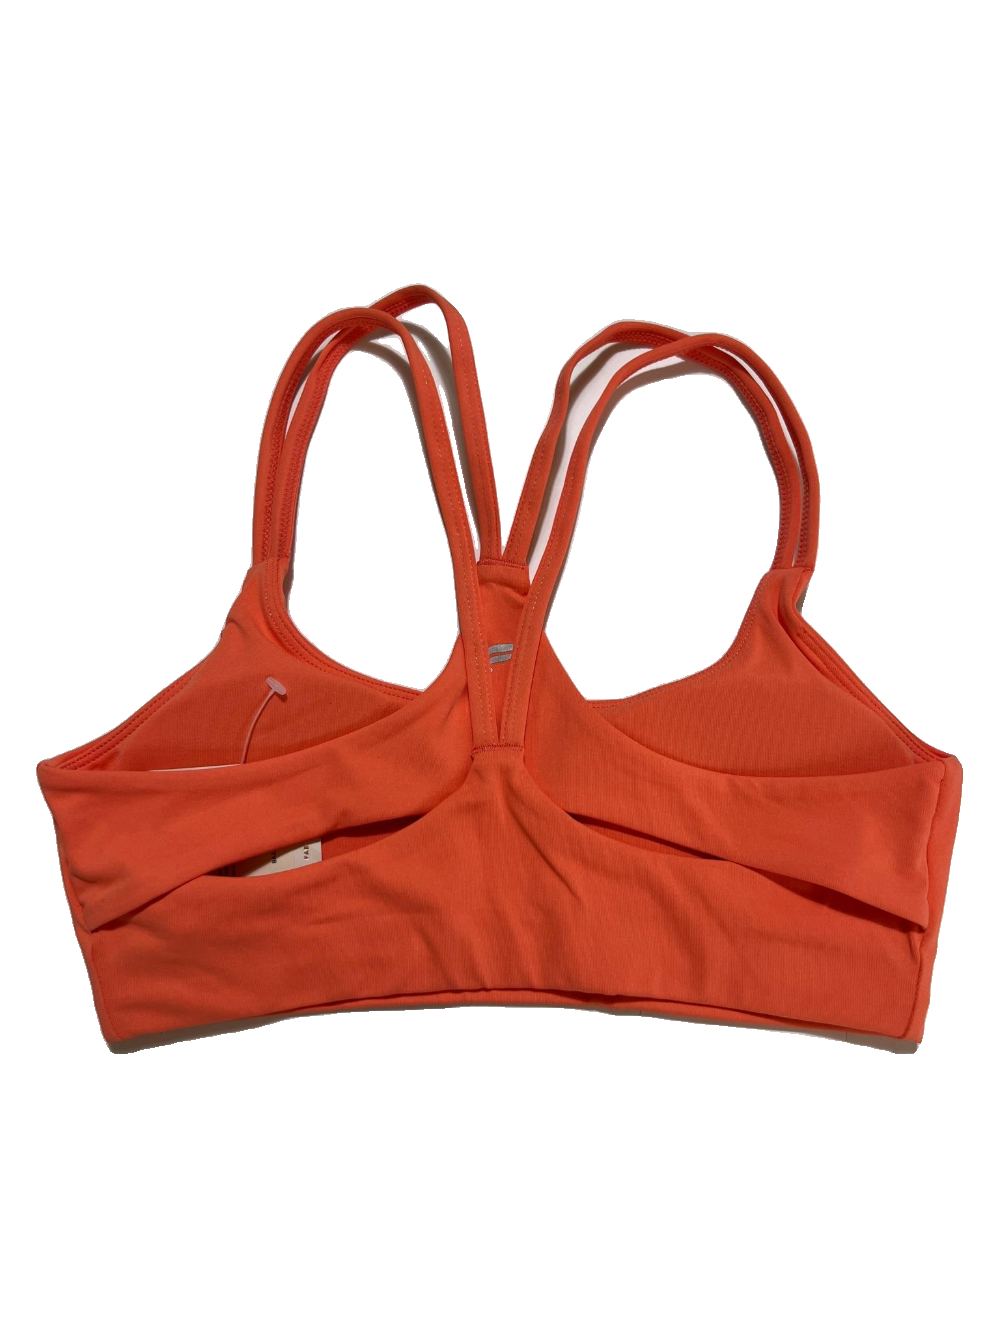 Fabletics- Coral "Low Impact" Sports Bra